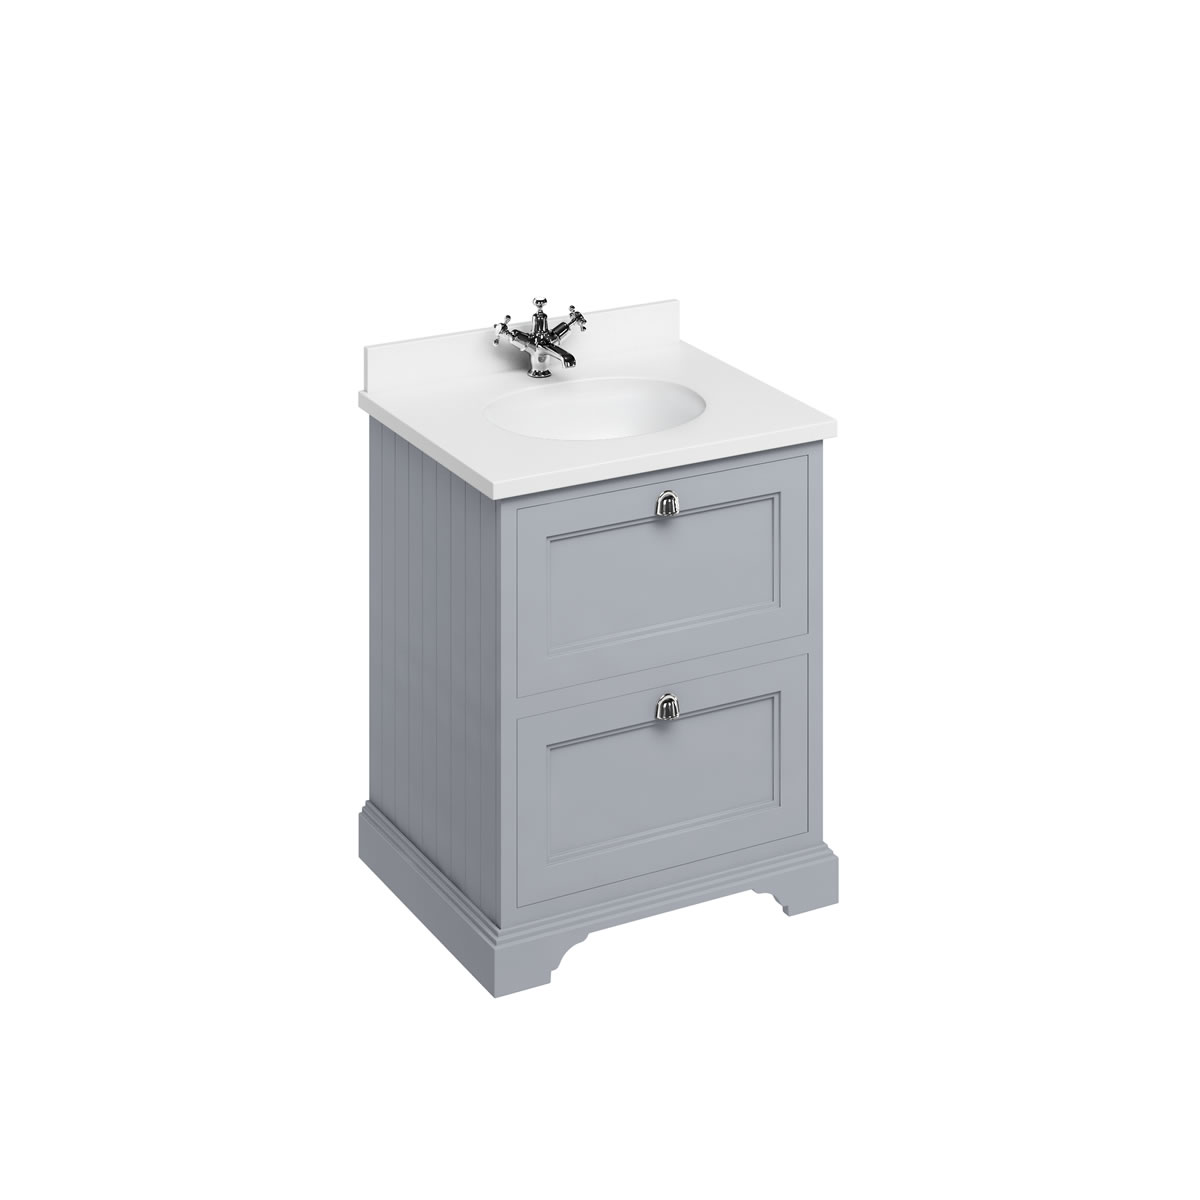 Freestanding 65 Vanity Unit with 2 drawers - Classic Grey and Minerva white worktop with integrated white basin 